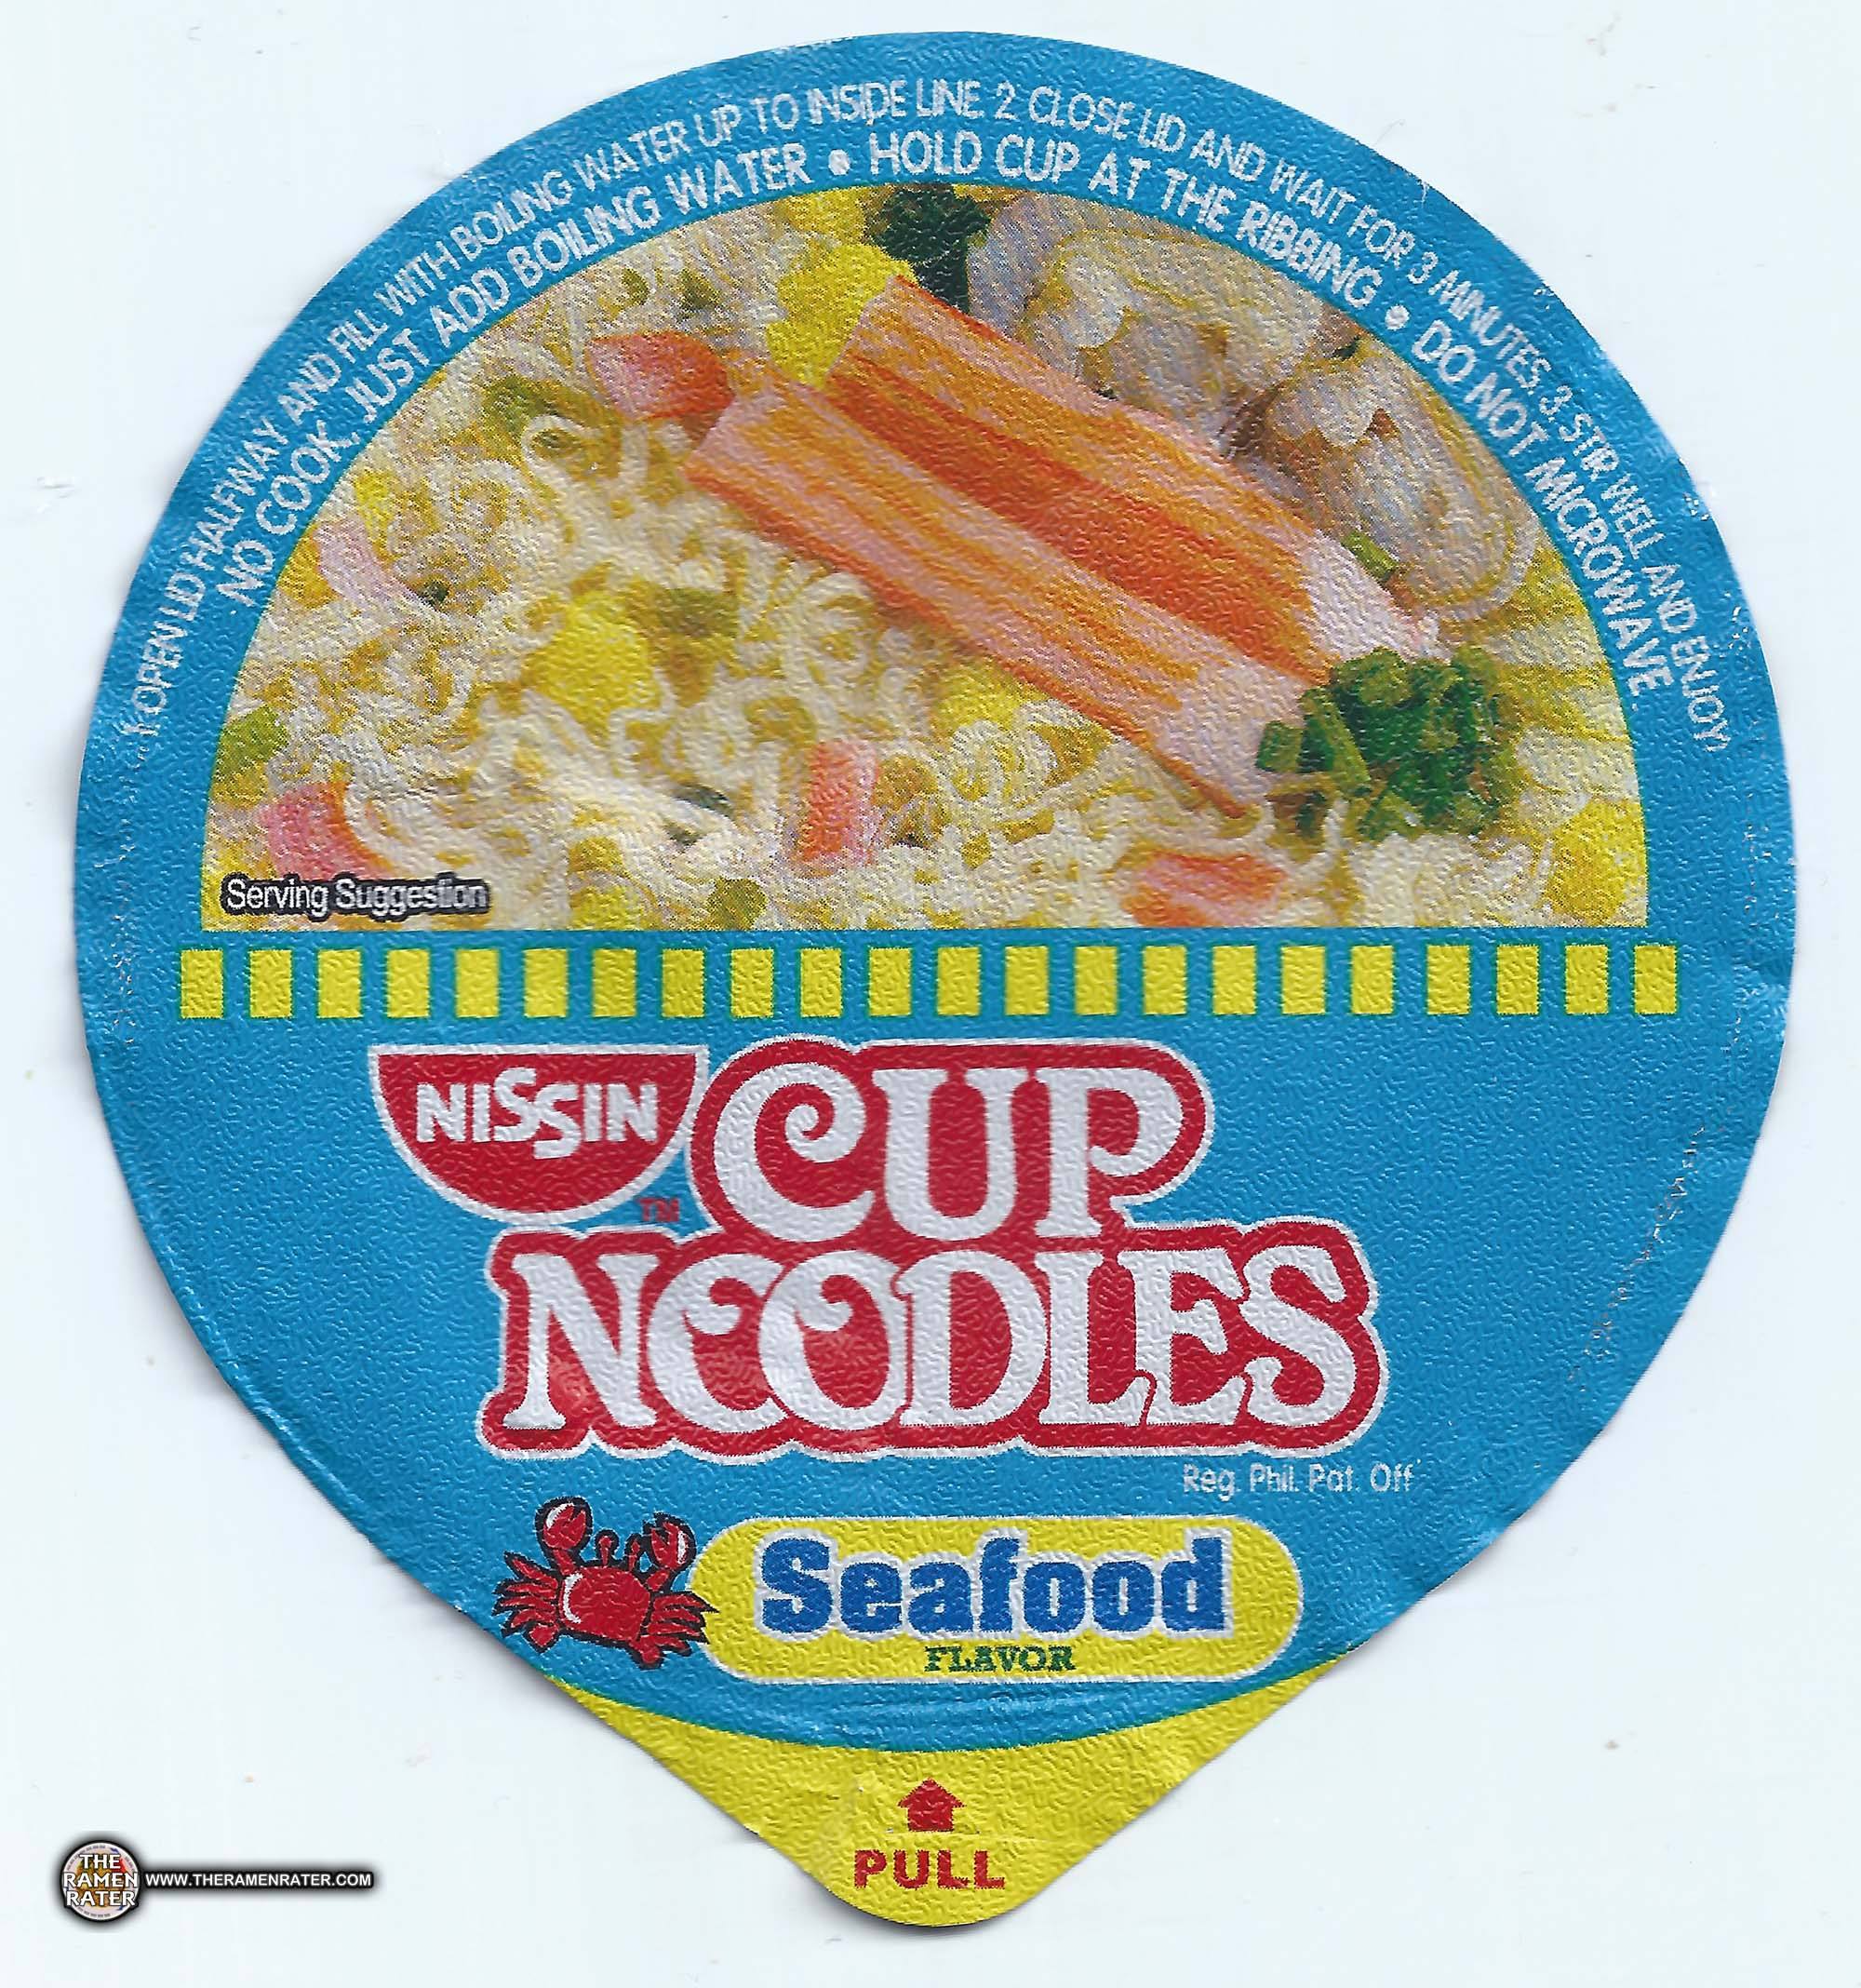 2961: Nissin Cup Noodles Seafood Flavor THE RAMEN RATER, 58% OFF